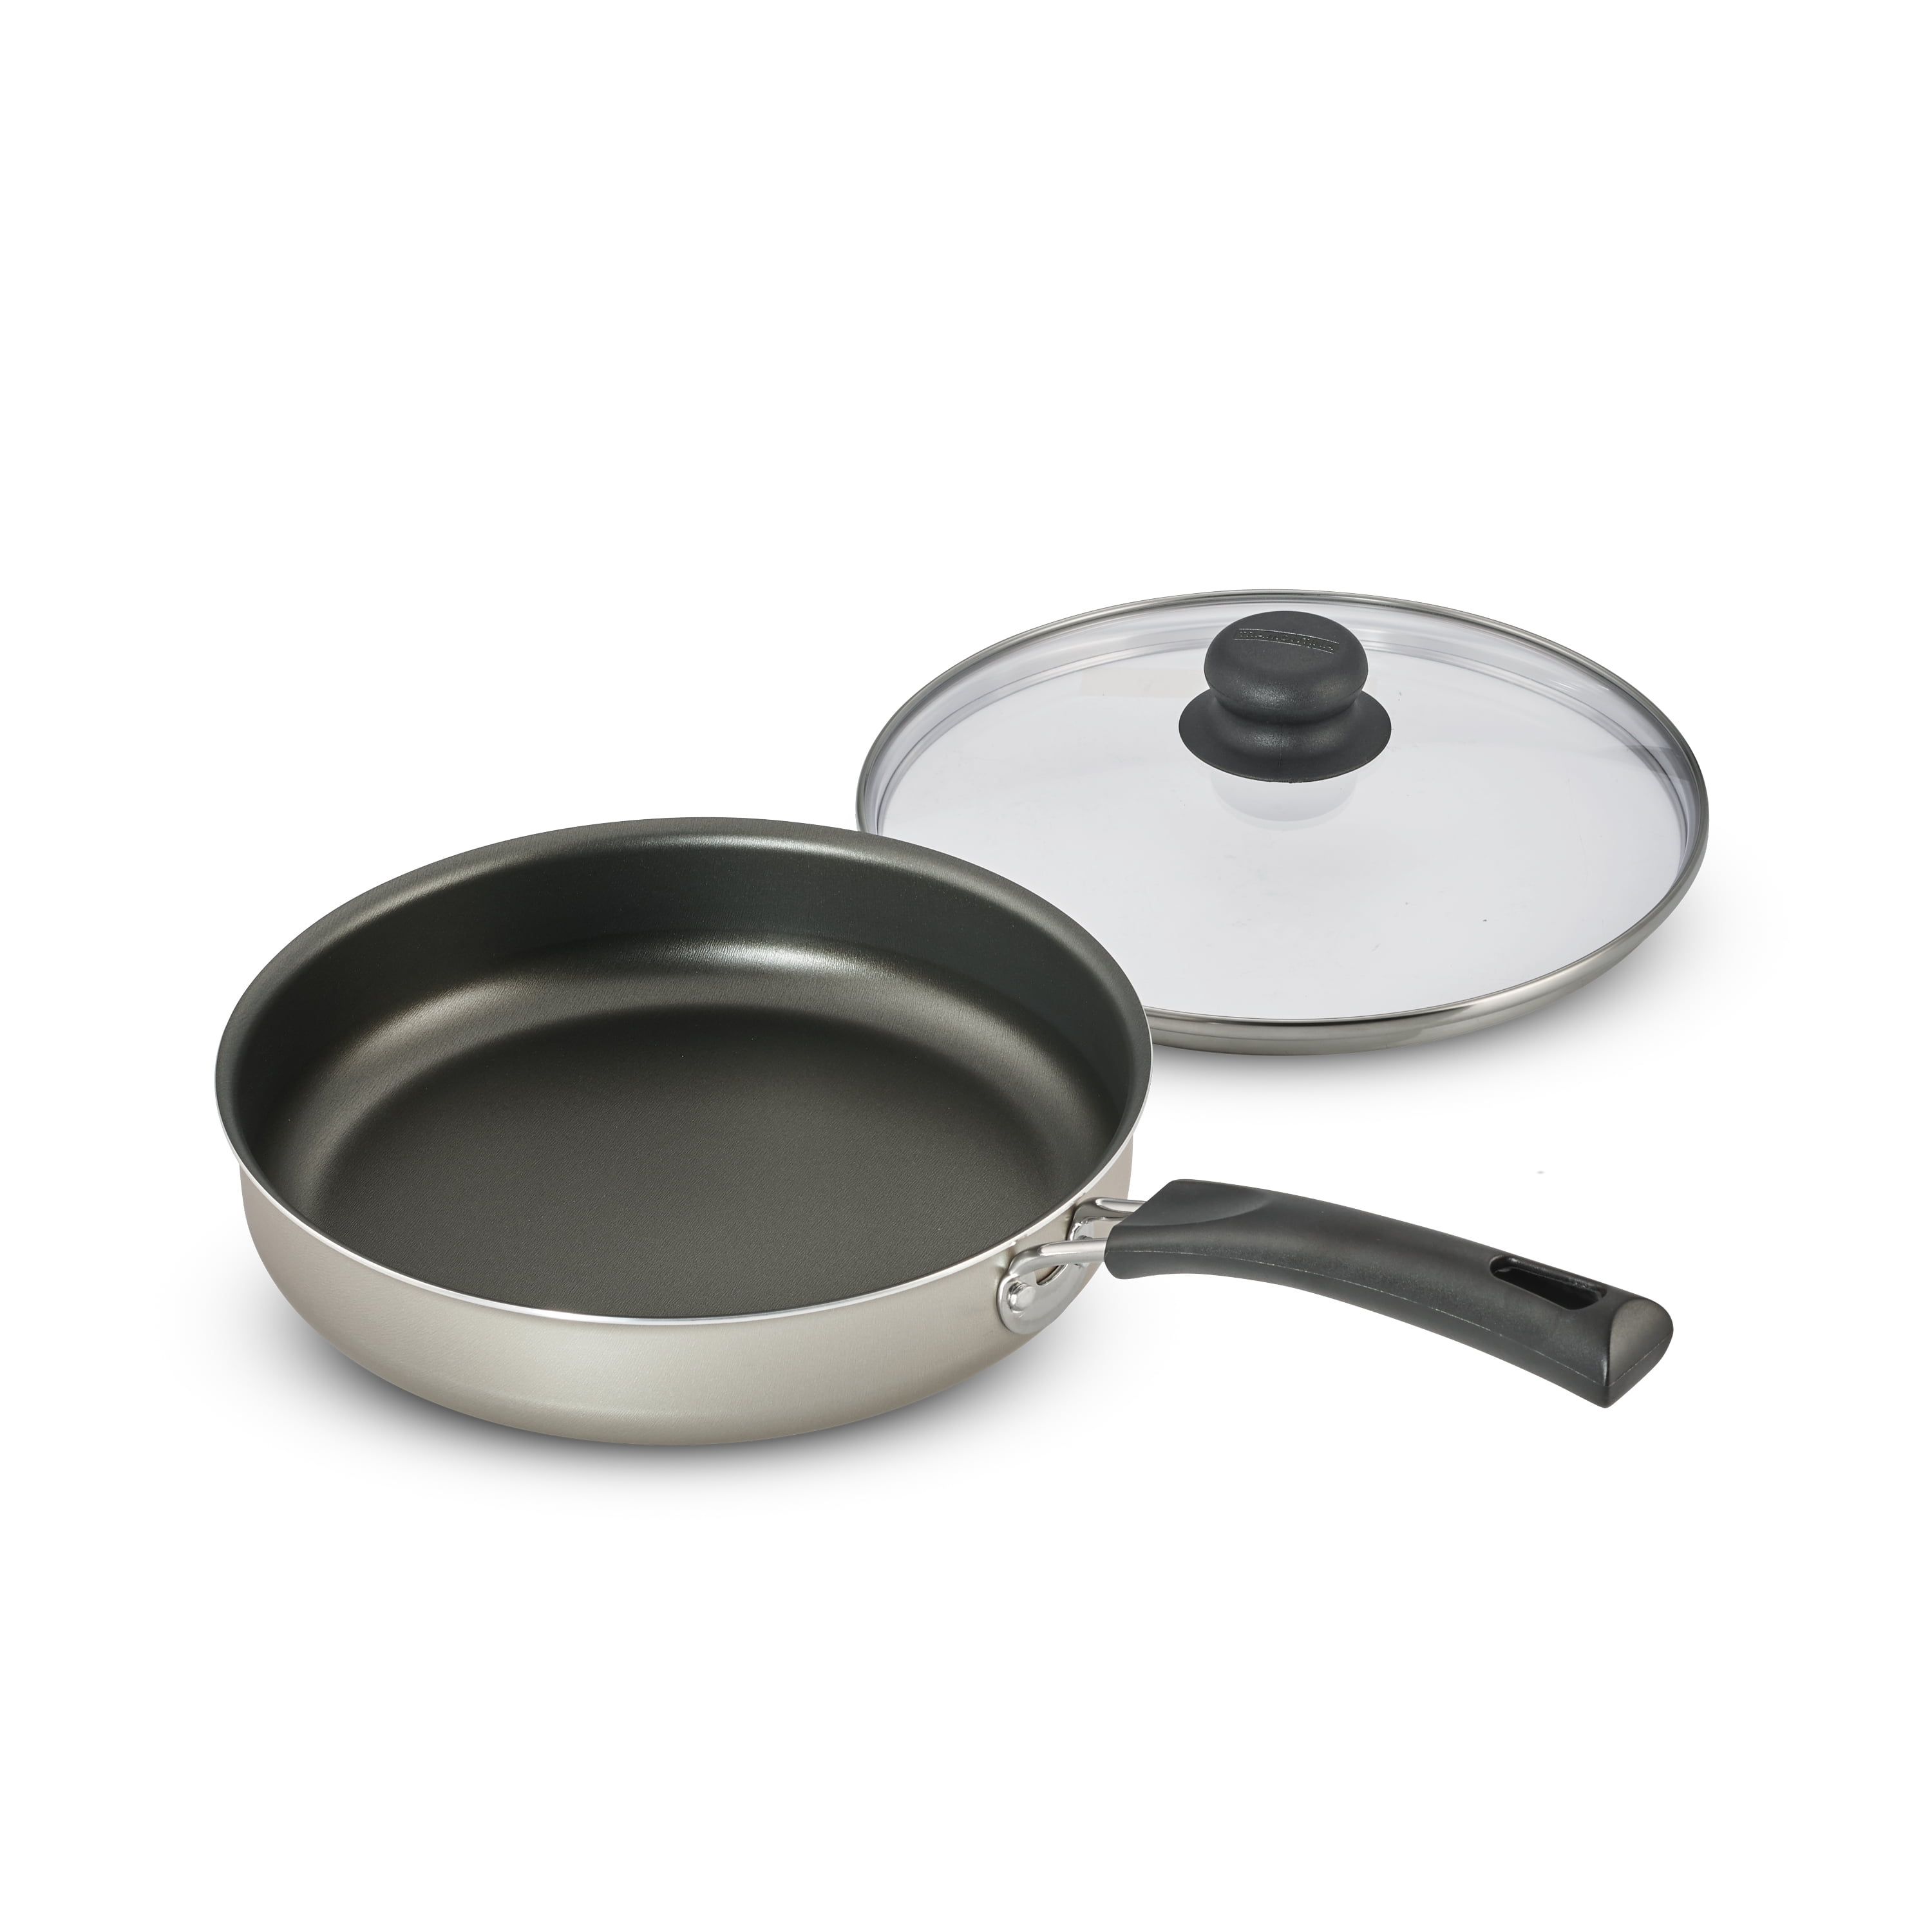 Tramontina 10 in Champagne Nonstick Covered Deep Saute Pan